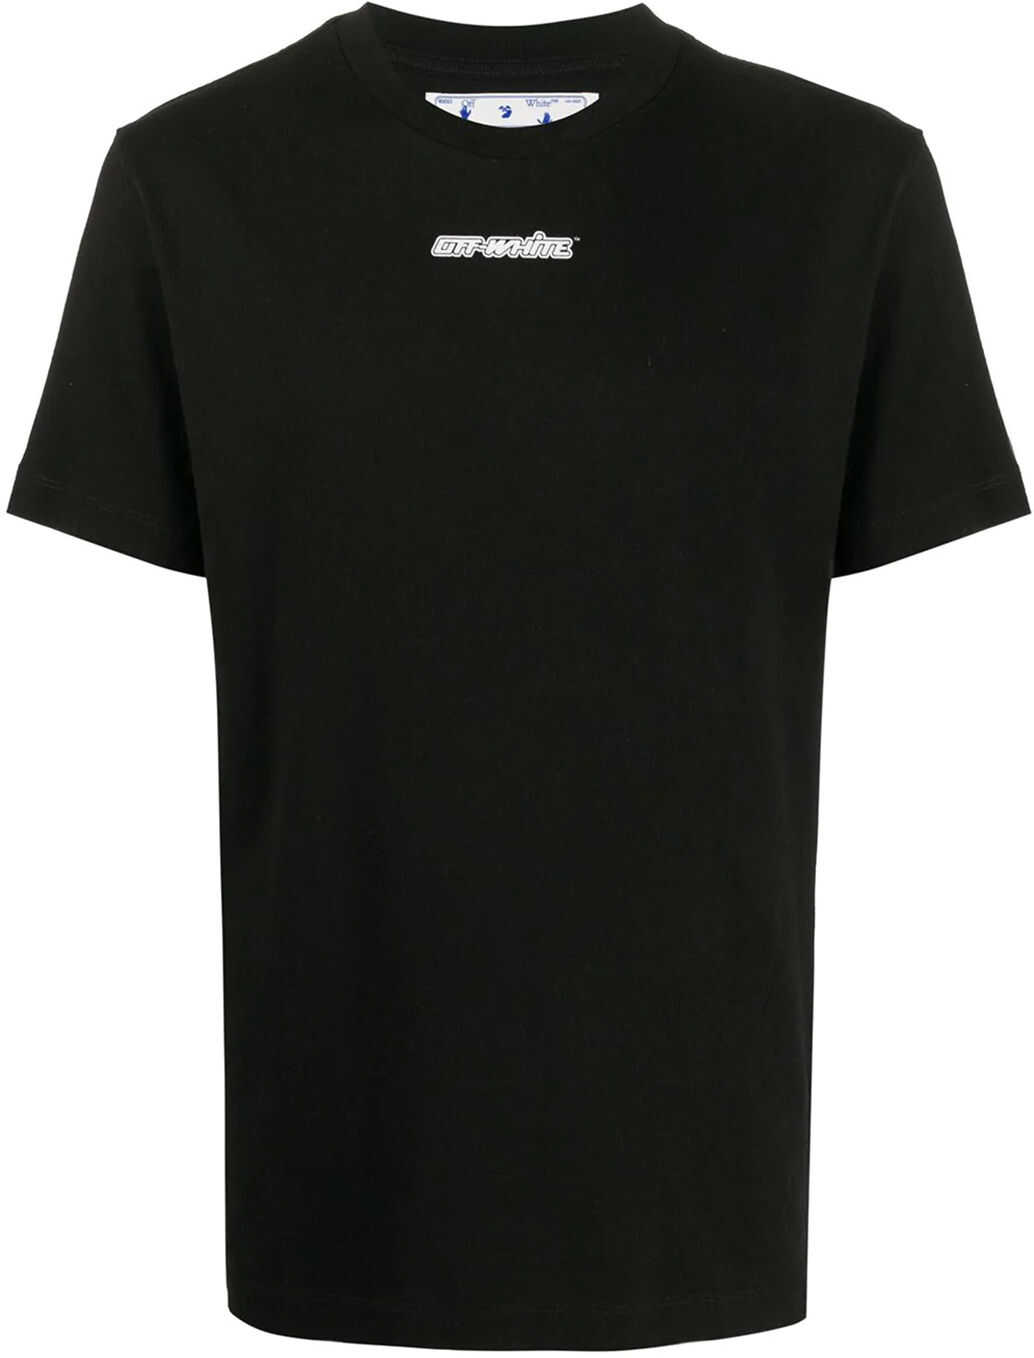 Off-White T-Shirt Arrows Print Black/red